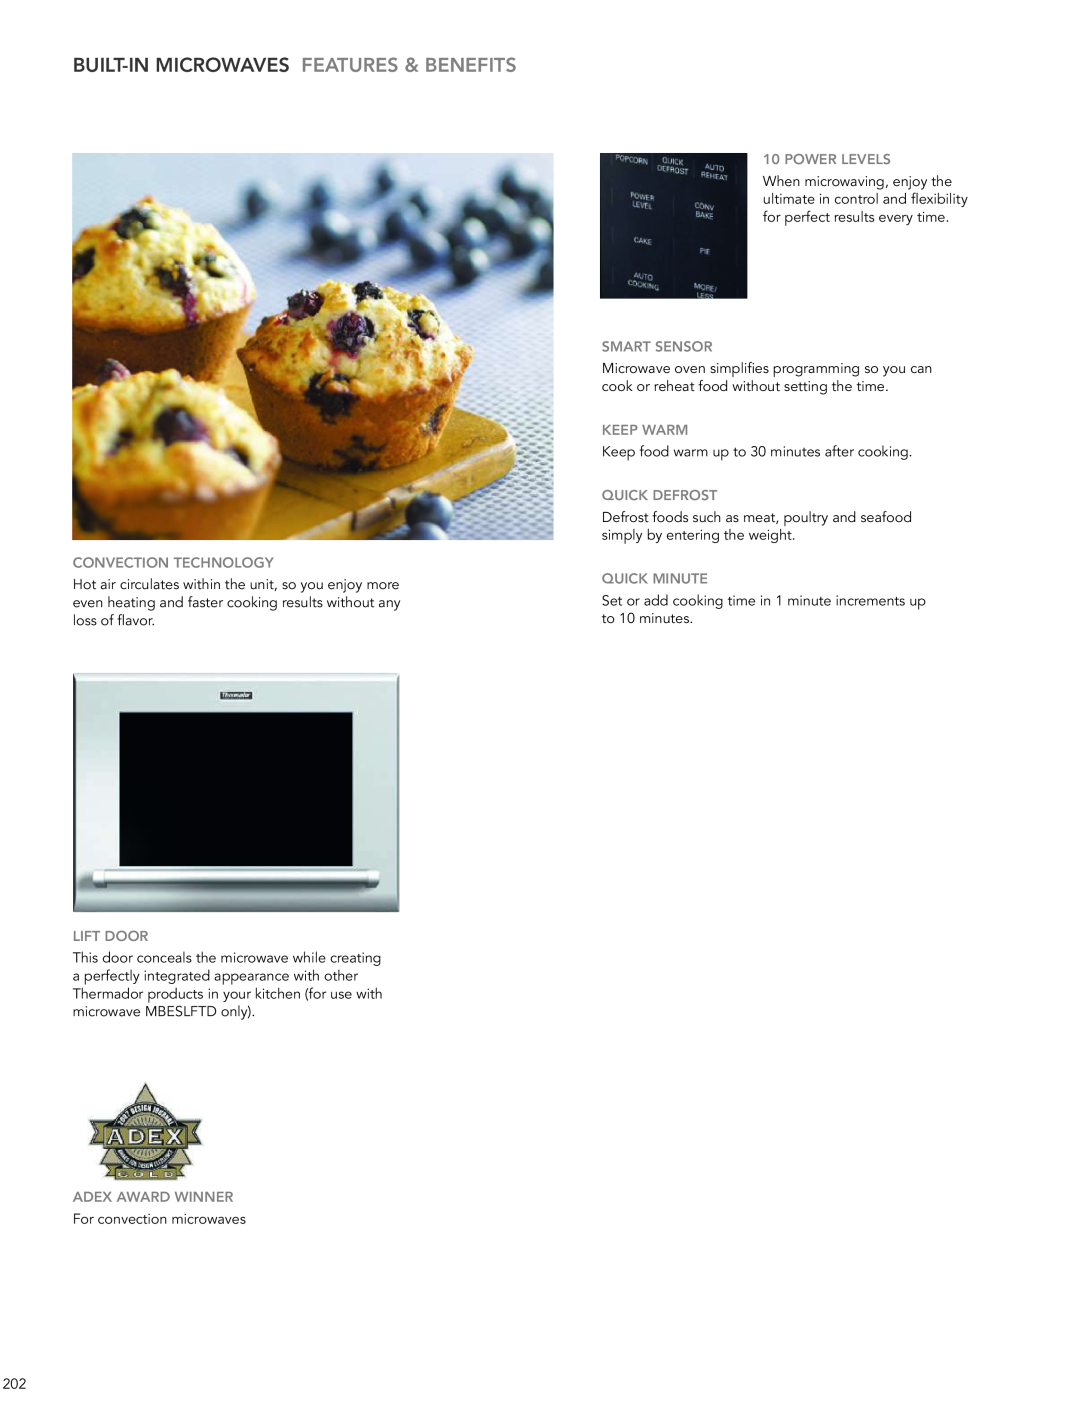 Thermador 200 BuILT-IN MICROWAVES FEATuRES & BENEFITS, Convection Technology, Lift Door, Adex Award Winner, Power Levels 